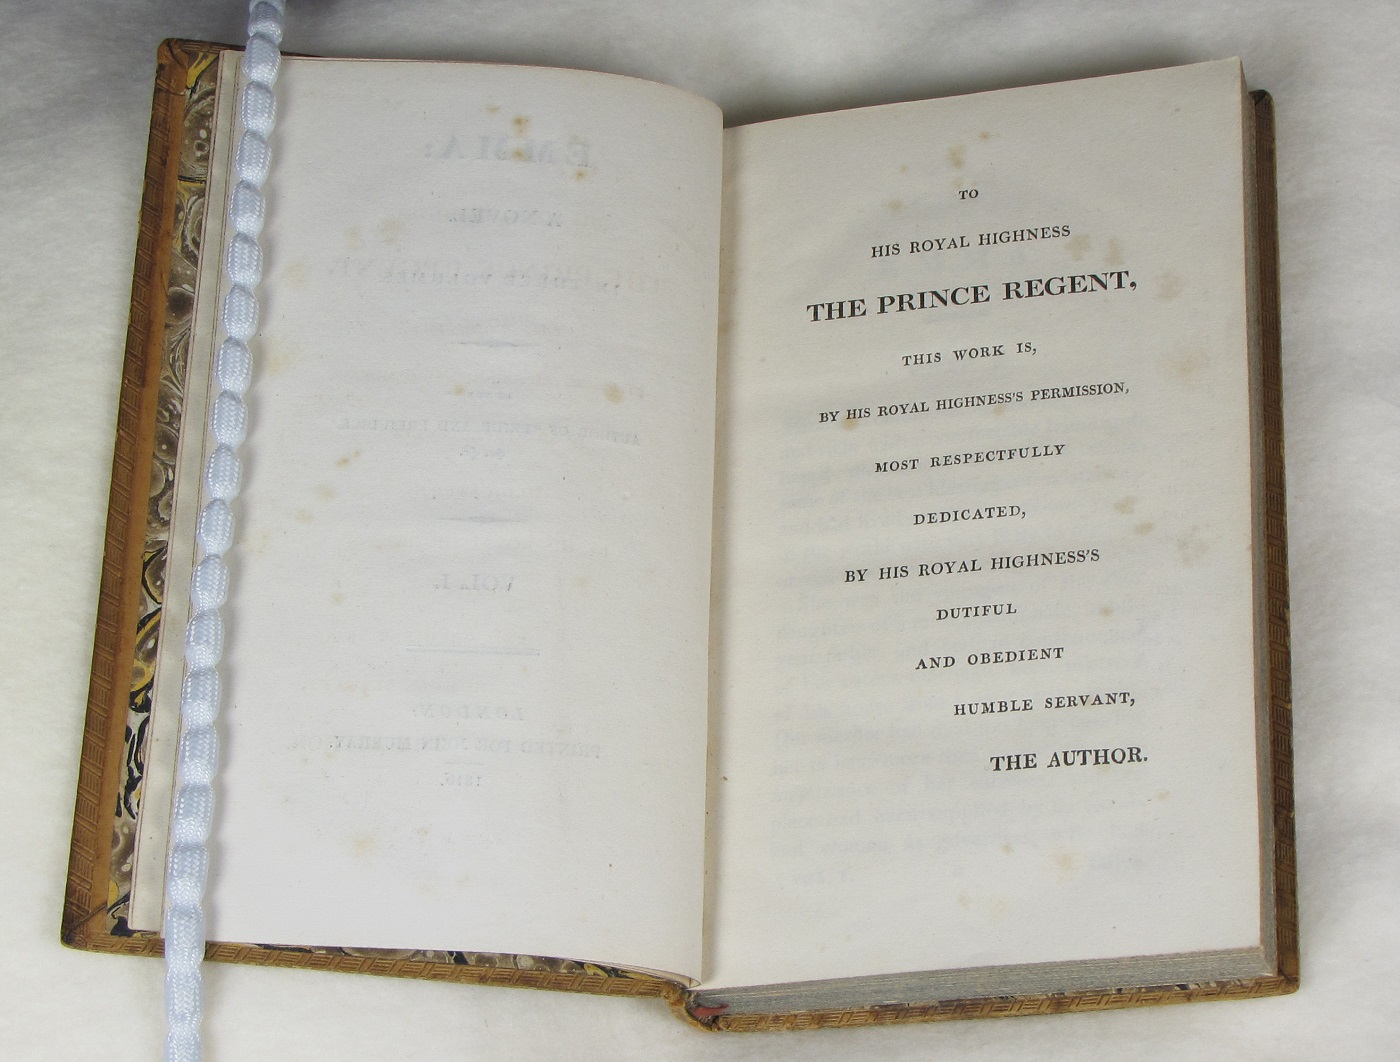 First edition of Emma, open at the dedication to the Prince Regent